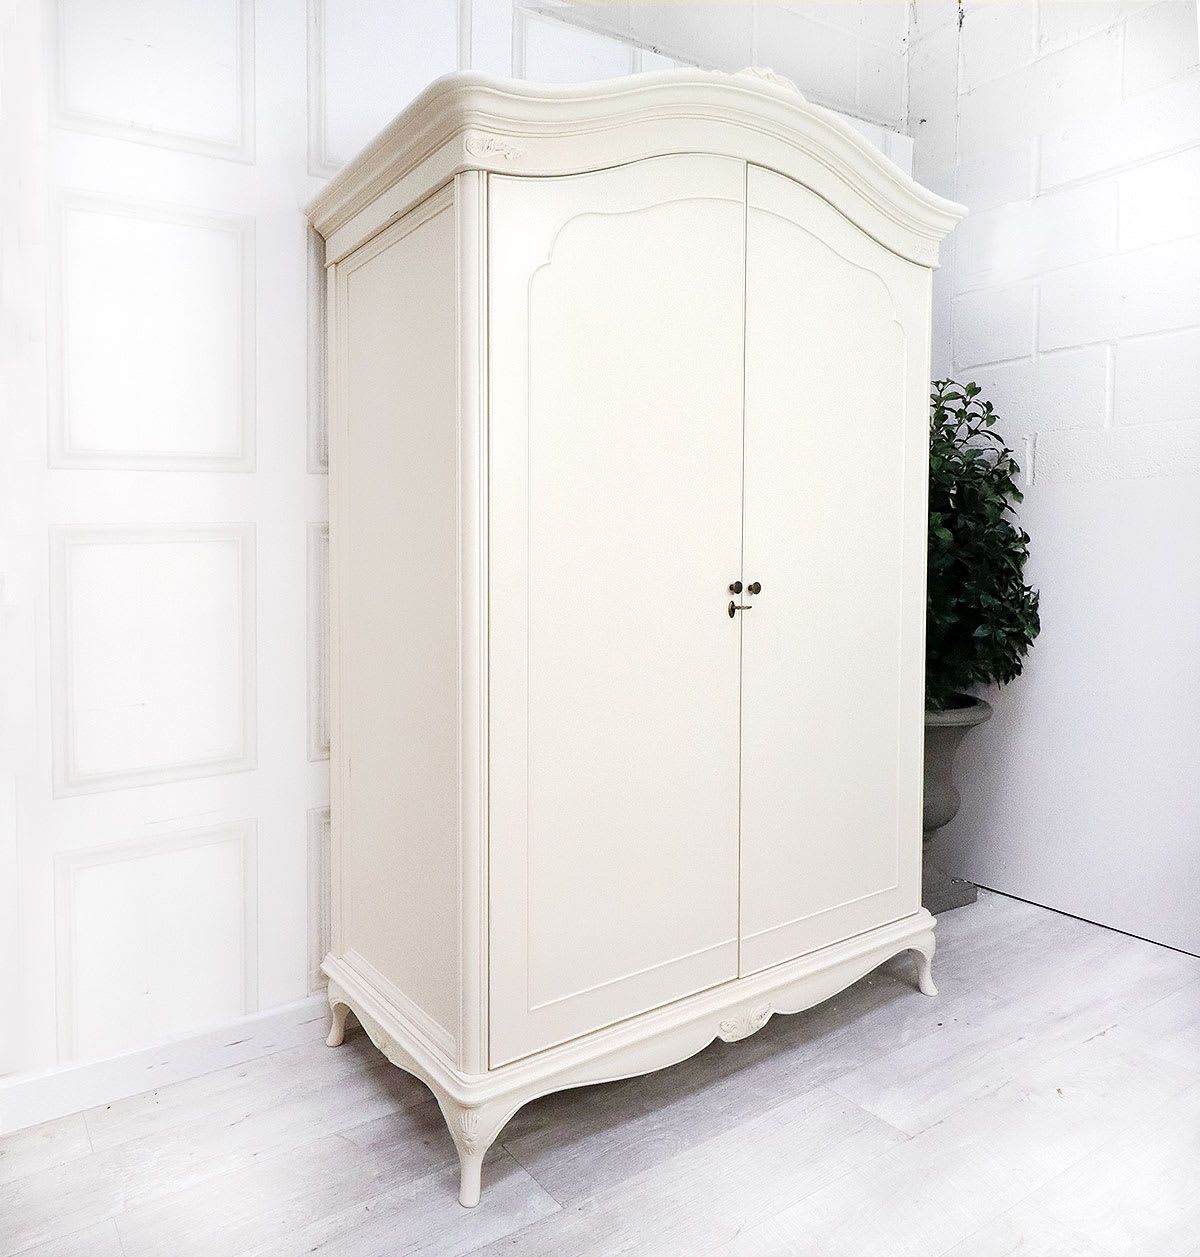 Willis & Gambier French Style Ivory Large Armoire Wardrobe | Nicky Cornell  A Uk Stockist Pertaining To French Armoires And Wardrobes (View 4 of 20)